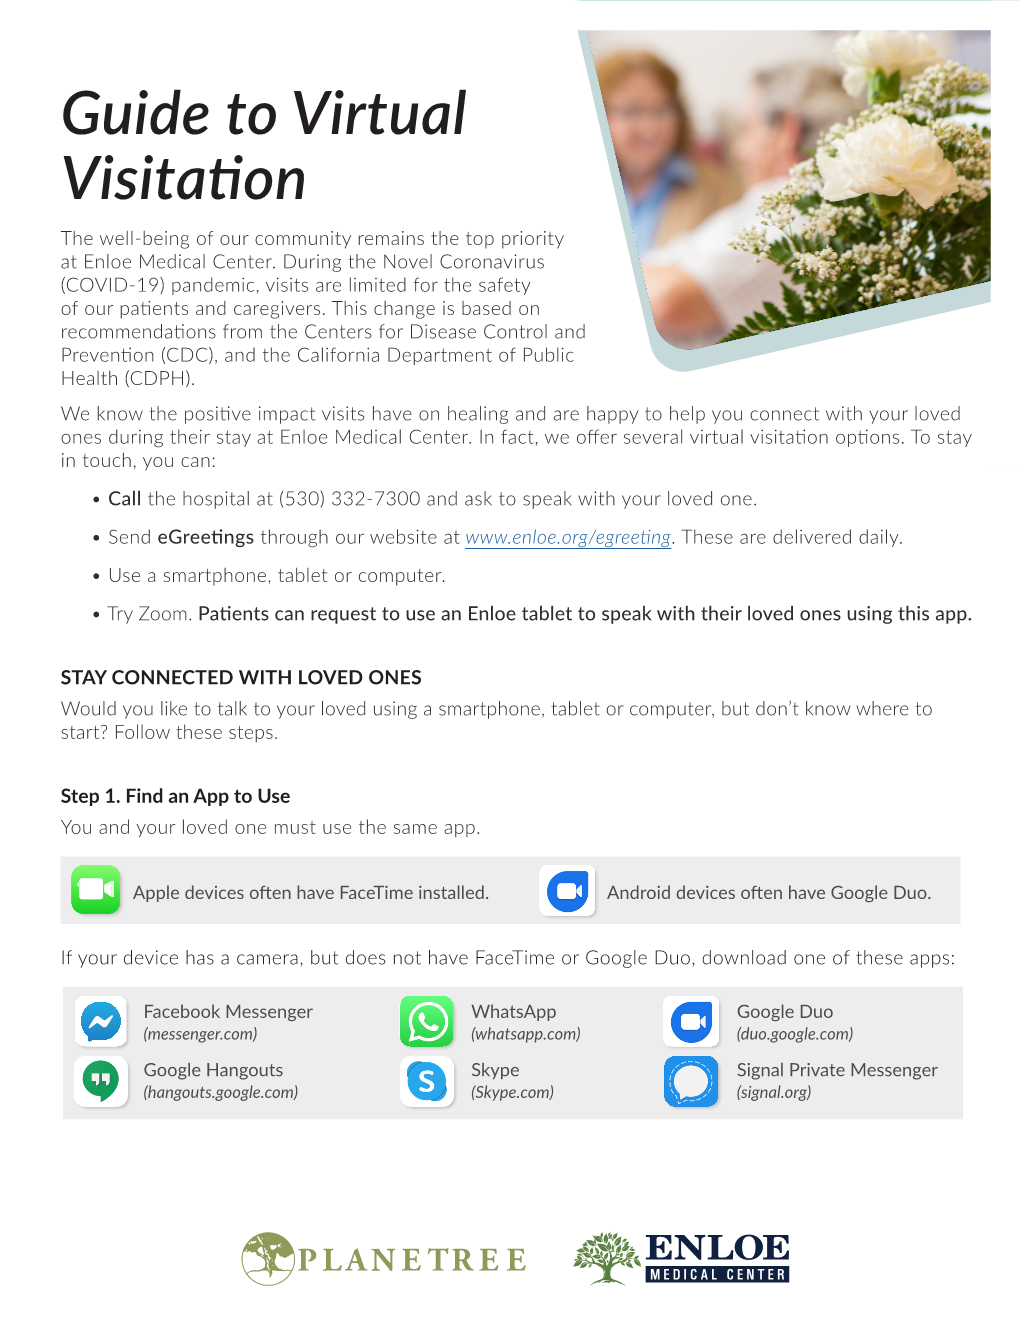 Guide to Virtual Visitation the Well-Being of Our Community Remains the Top Priority at Enloe Medical Center